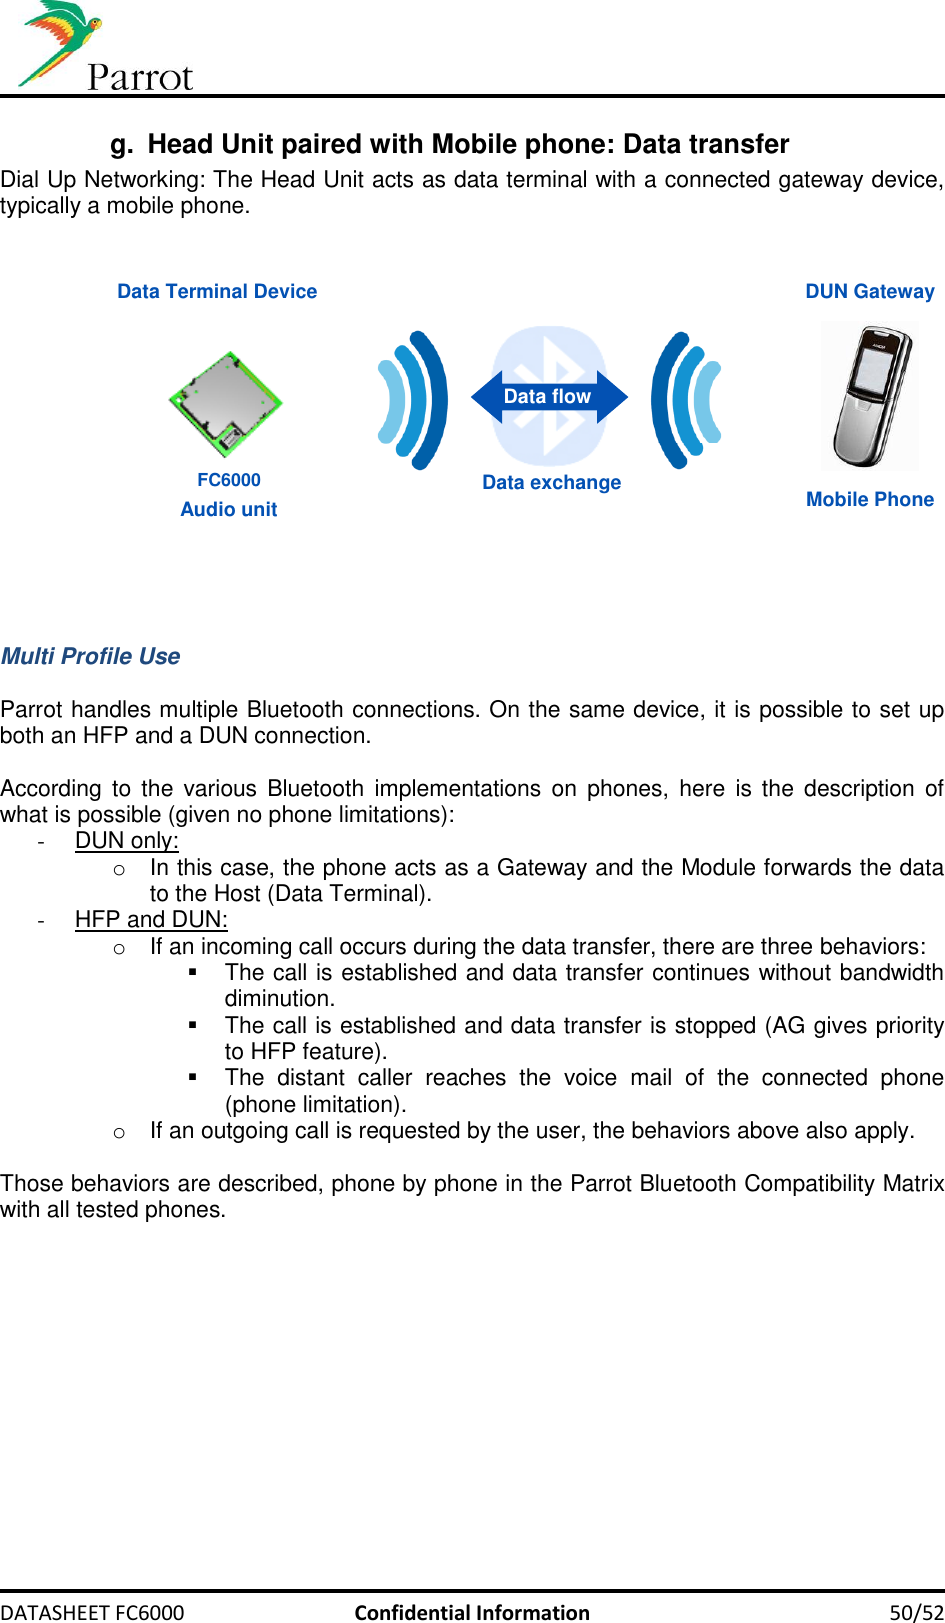     DATASHEET FC6000  Confidential Information 50/52 g.  Head Unit paired with Mobile phone: Data transfer Dial Up Networking: The Head Unit acts as data terminal with a connected gateway device, typically a mobile phone.    DUN Gateway Data Terminal Device Mobile Phone Data exchange Data flow Audio unit FC6000    Multi Profile Use  Parrot handles multiple Bluetooth connections. On the same device, it is possible to set up both an HFP and a DUN connection.  According  to  the  various  Bluetooth  implementations  on  phones,  here  is the  description of what is possible (given no phone limitations): -  DUN only:  o  In this case, the phone acts as a Gateway and the Module forwards the data to the Host (Data Terminal). -  HFP and DUN: o  If an incoming call occurs during the data transfer, there are three behaviors:    The call is established and data transfer continues without bandwidth diminution.   The call is established and data transfer is stopped (AG gives priority to HFP feature).   The  distant  caller  reaches  the  voice  mail  of  the  connected  phone (phone limitation). o  If an outgoing call is requested by the user, the behaviors above also apply.  Those behaviors are described, phone by phone in the Parrot Bluetooth Compatibility Matrix with all tested phones.  